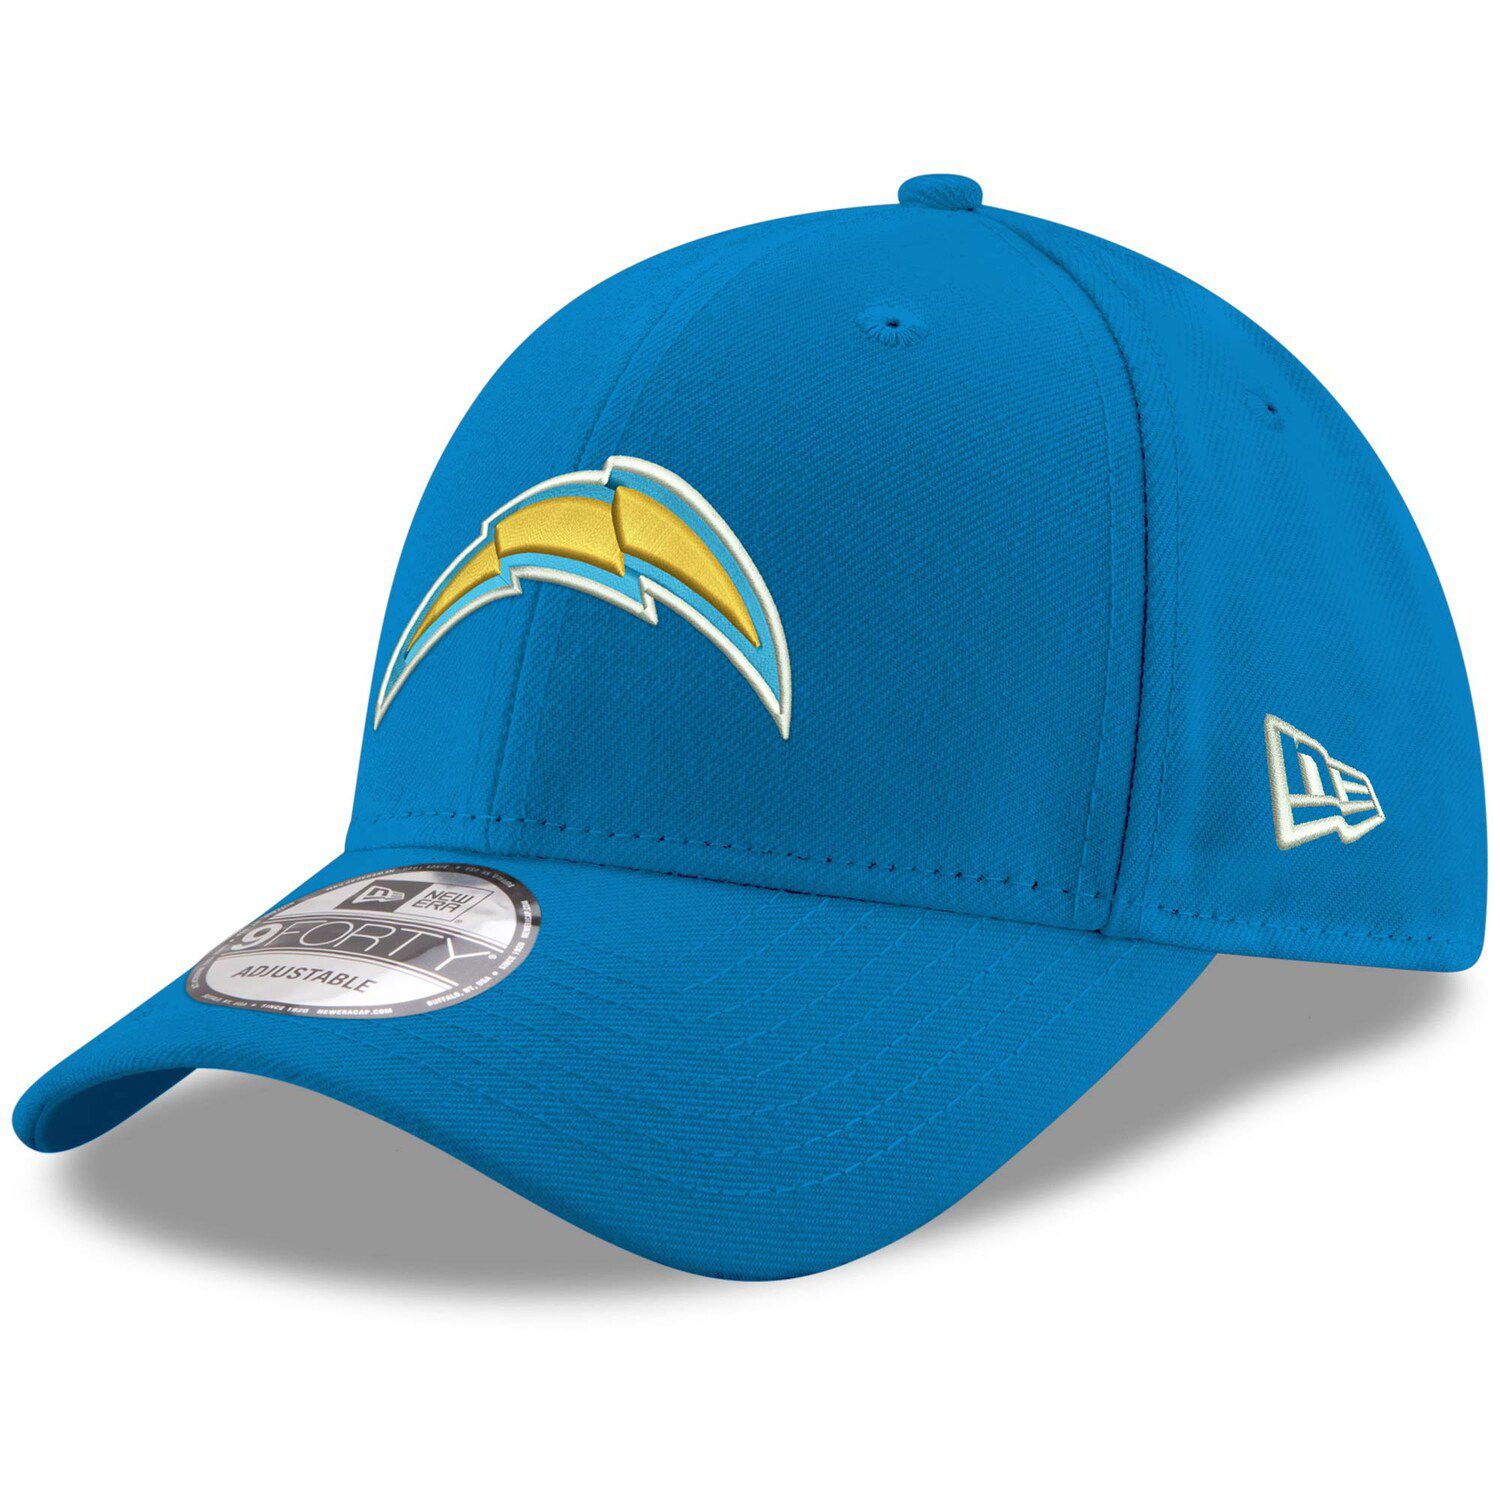 chargers powder blue hat